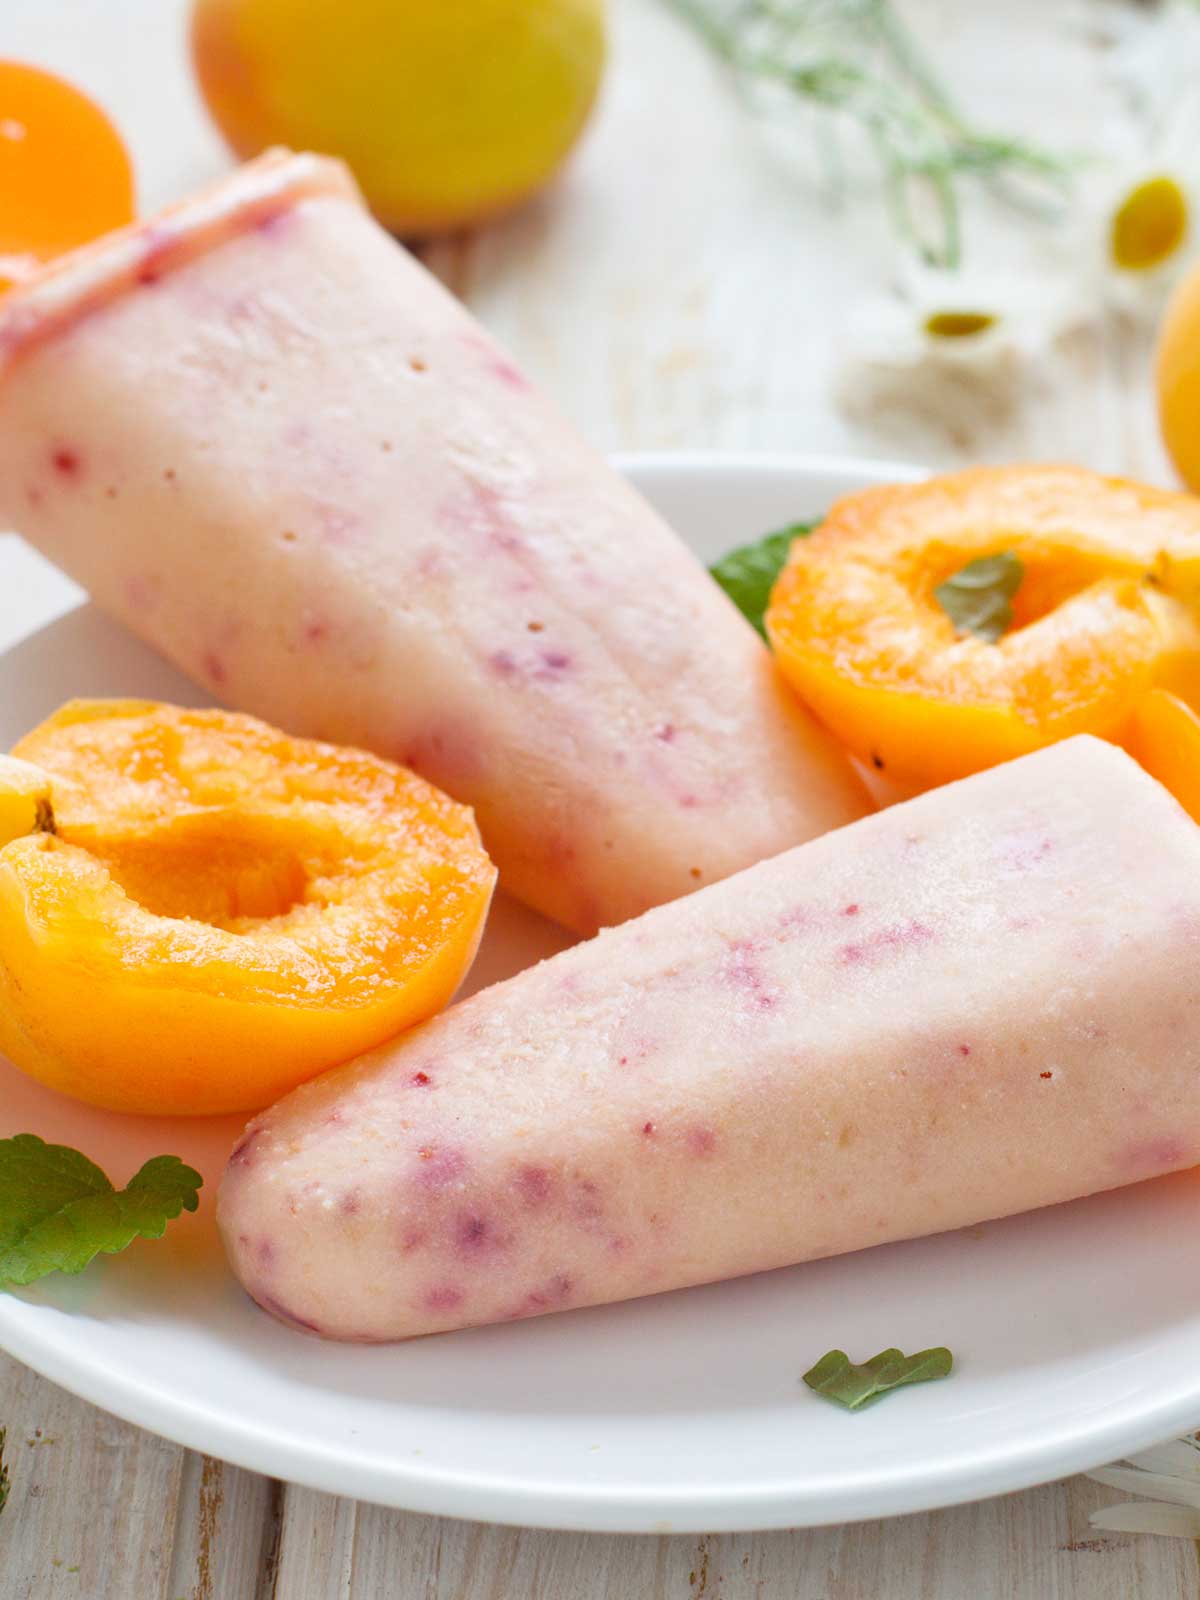 dairy-free peach basil popsicles with fresh sliced peaches on the side